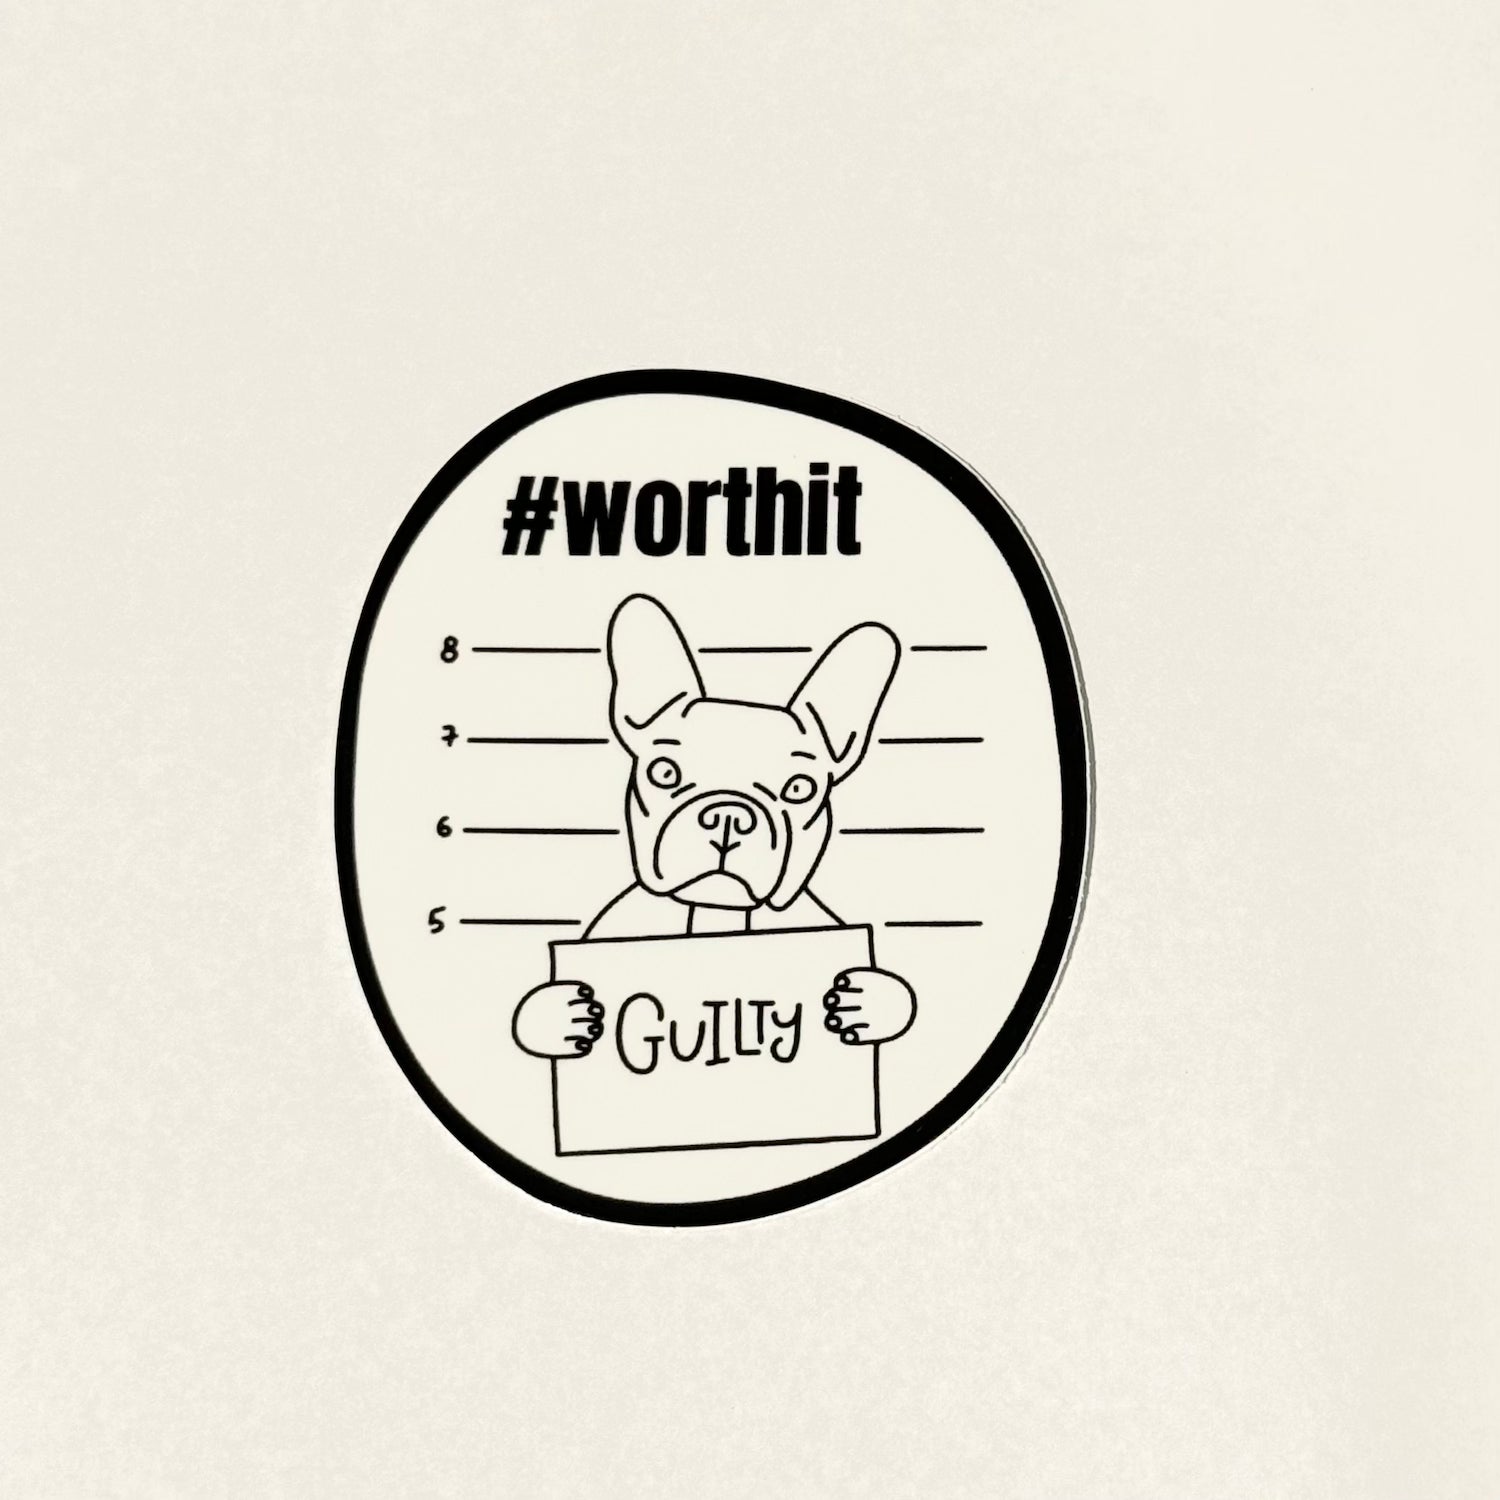 line art of french bulldog holding a suspect line-up sign that says "GUILTY" - hashtag above says #worthit